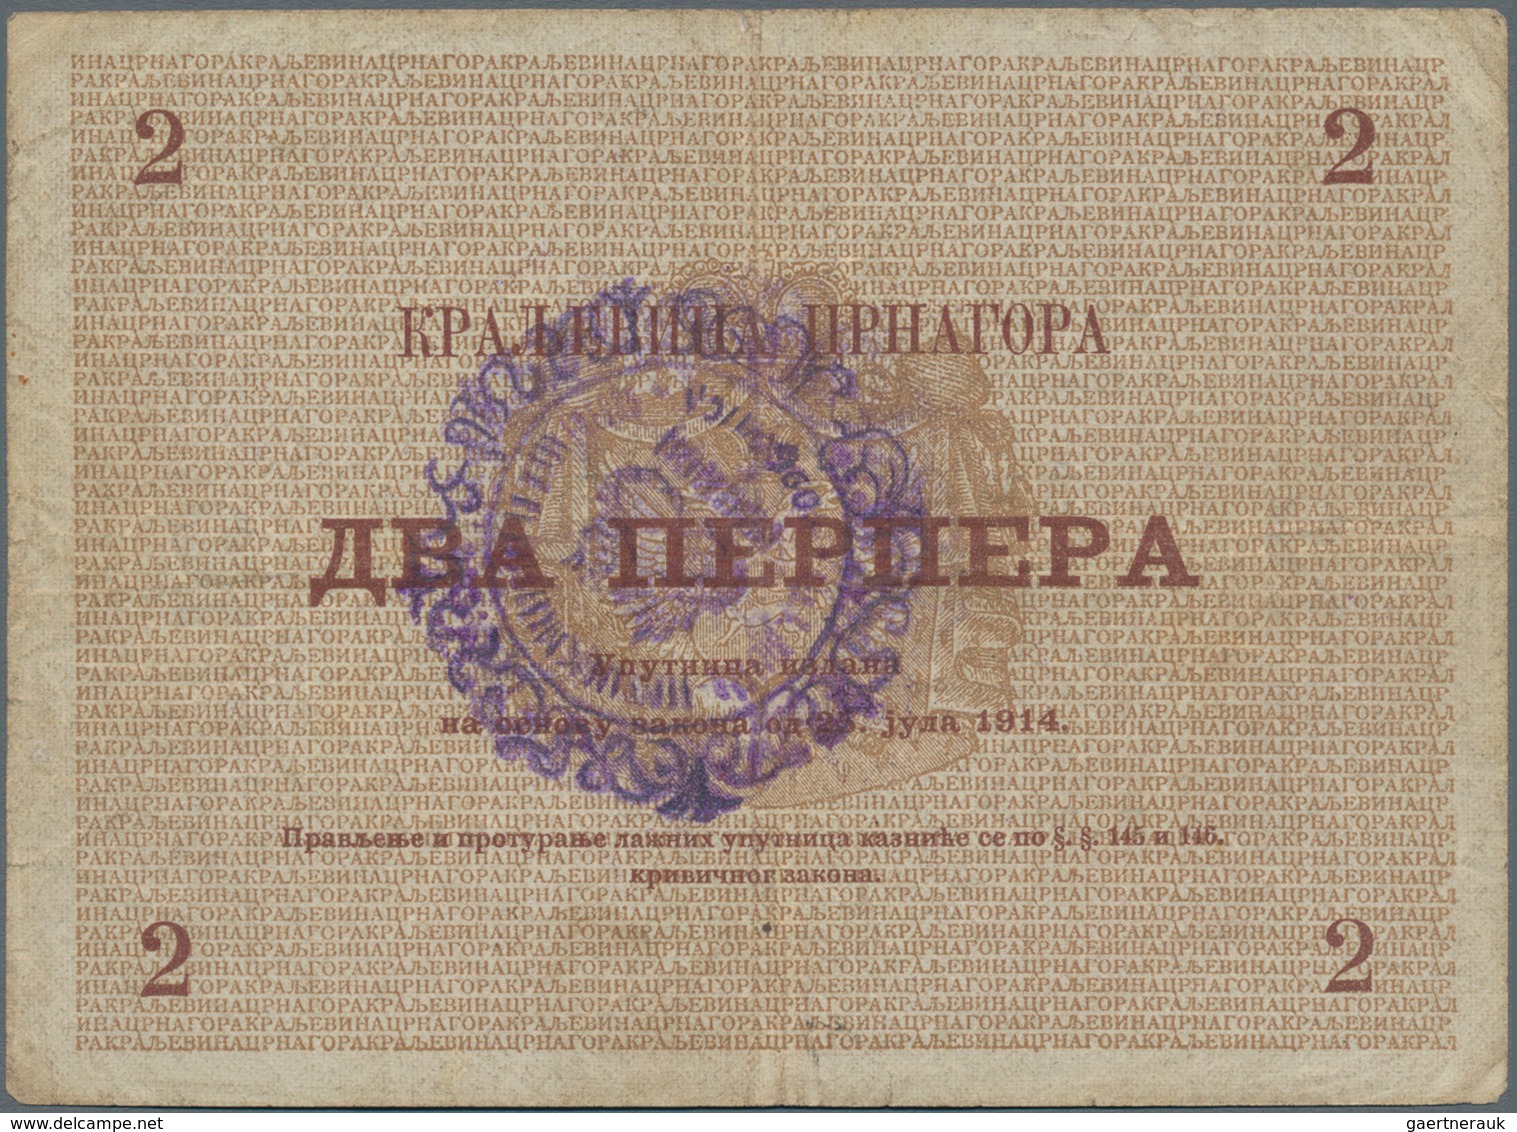 Montenegro: Very interesting with 10 banknotes of the Military Government District Command including